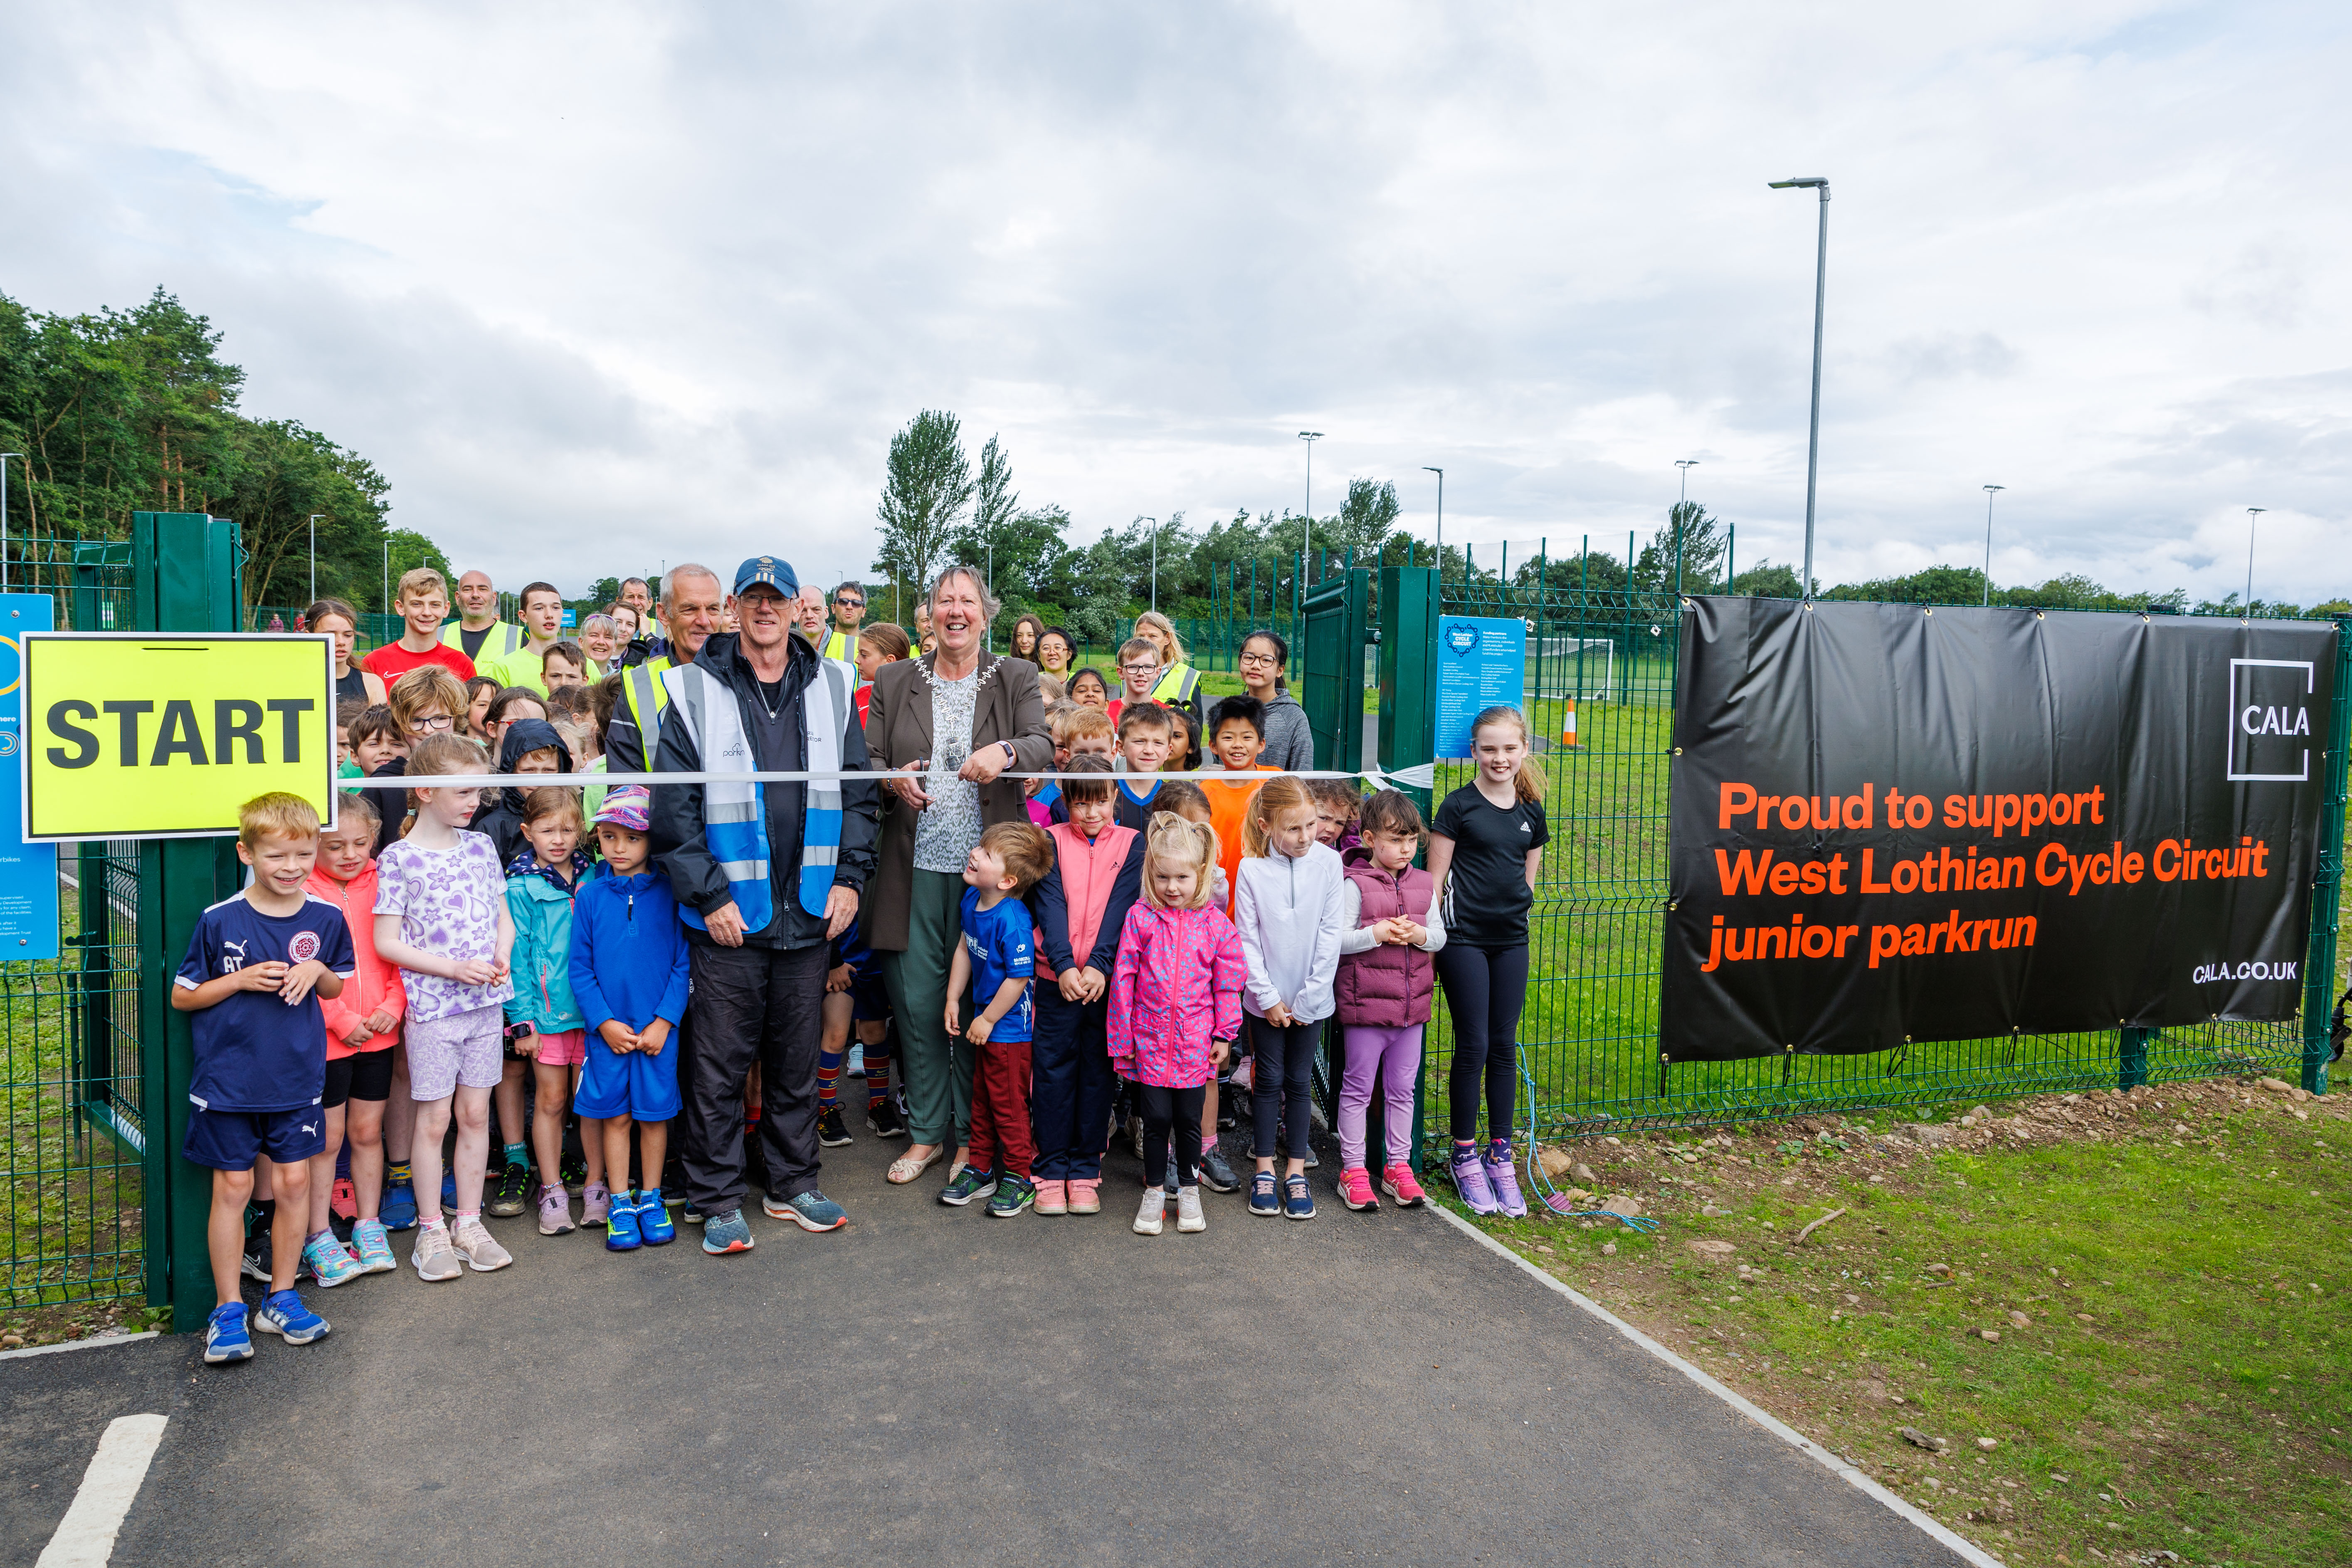 New junior Parkrun launched in Linlithgow thanks to Cala Homes support